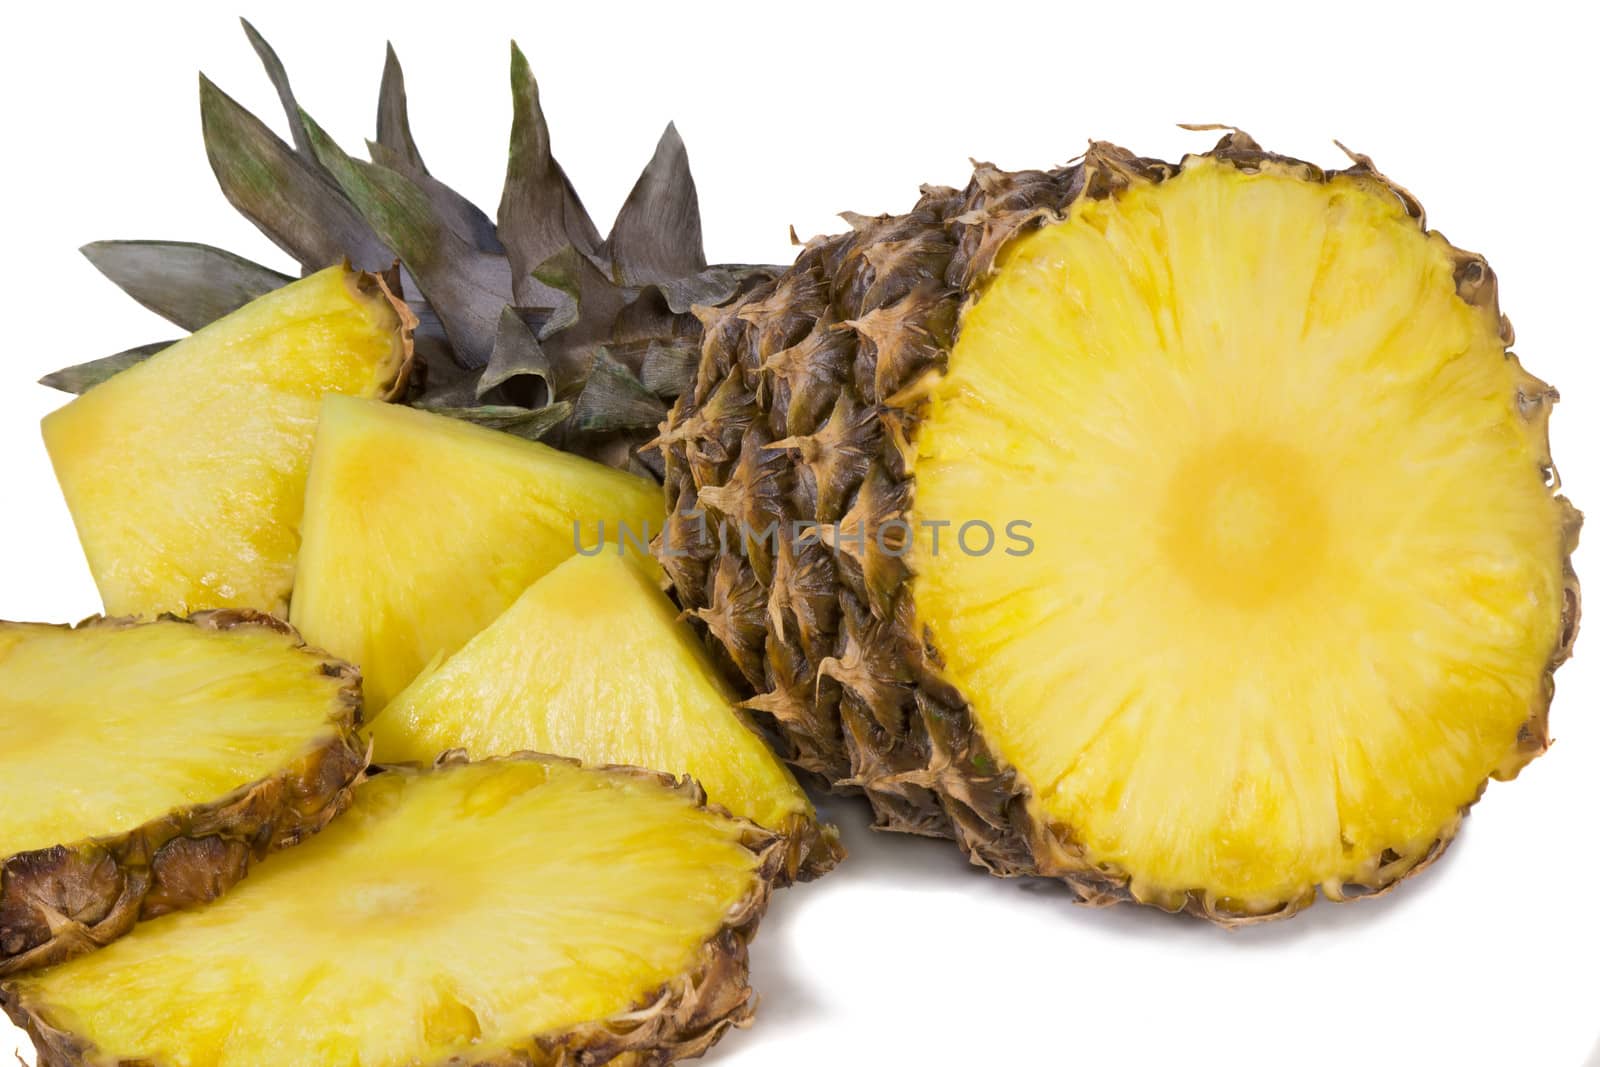 Pineapple and slices of pineapple on a white background. by georgina198